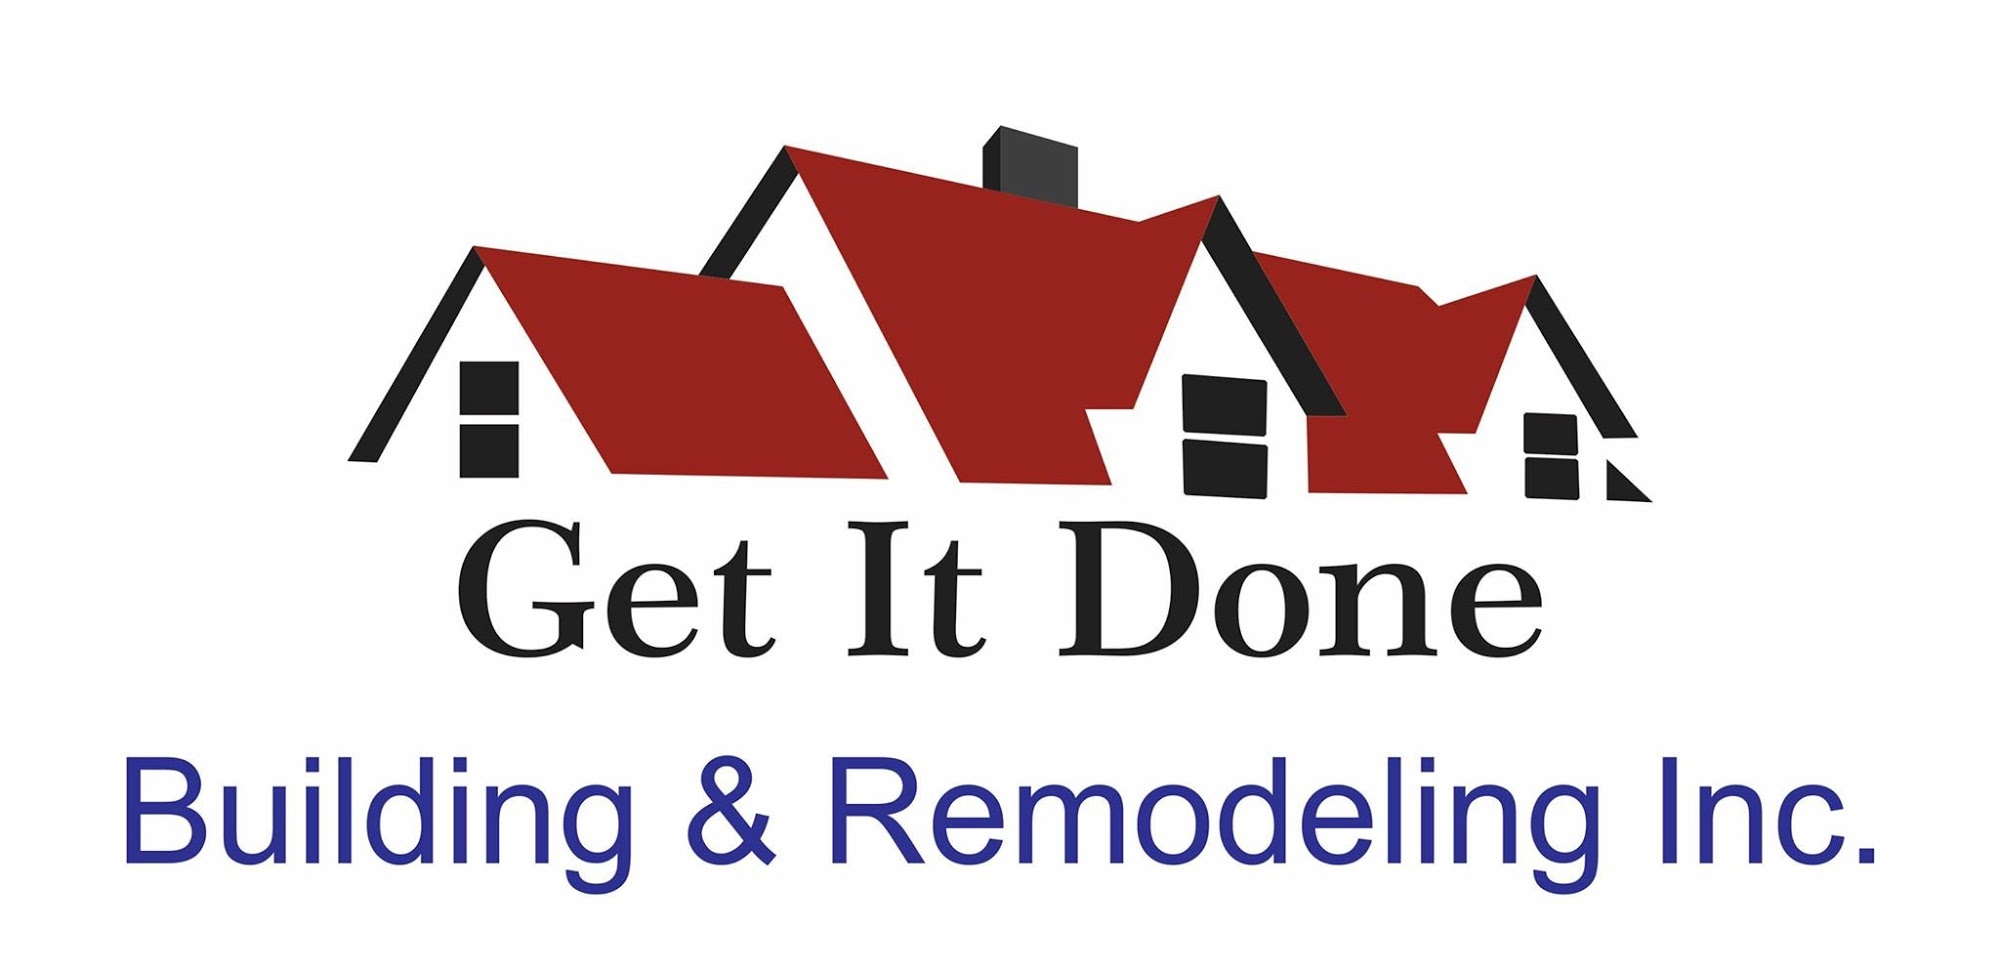 Get It Done Building & Remodeling Inc.